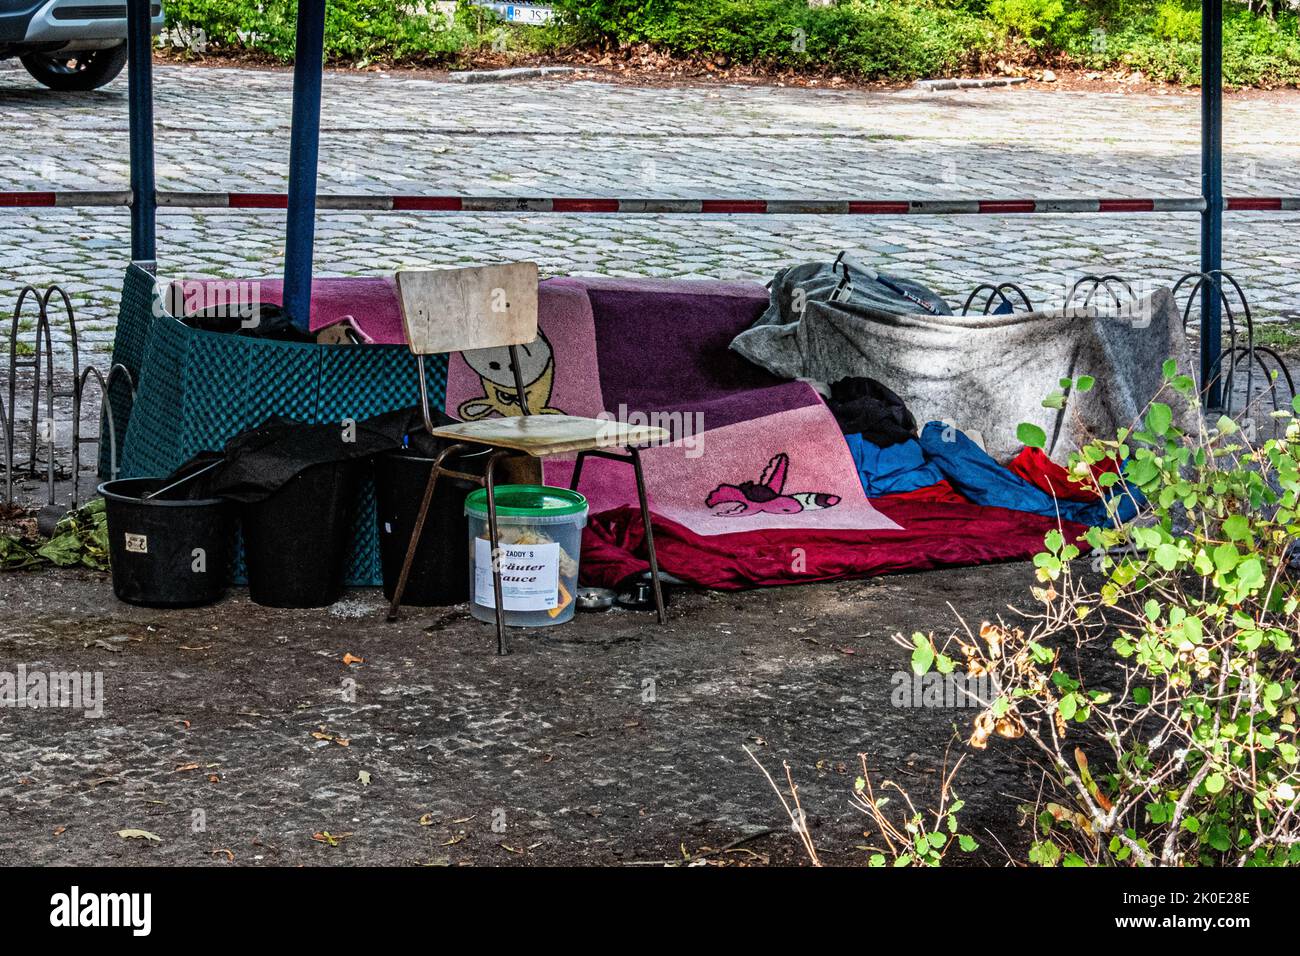 Small encampment and possessions of homeless person in car park , Reinickendorf, Berlin, Germany Stock Photo